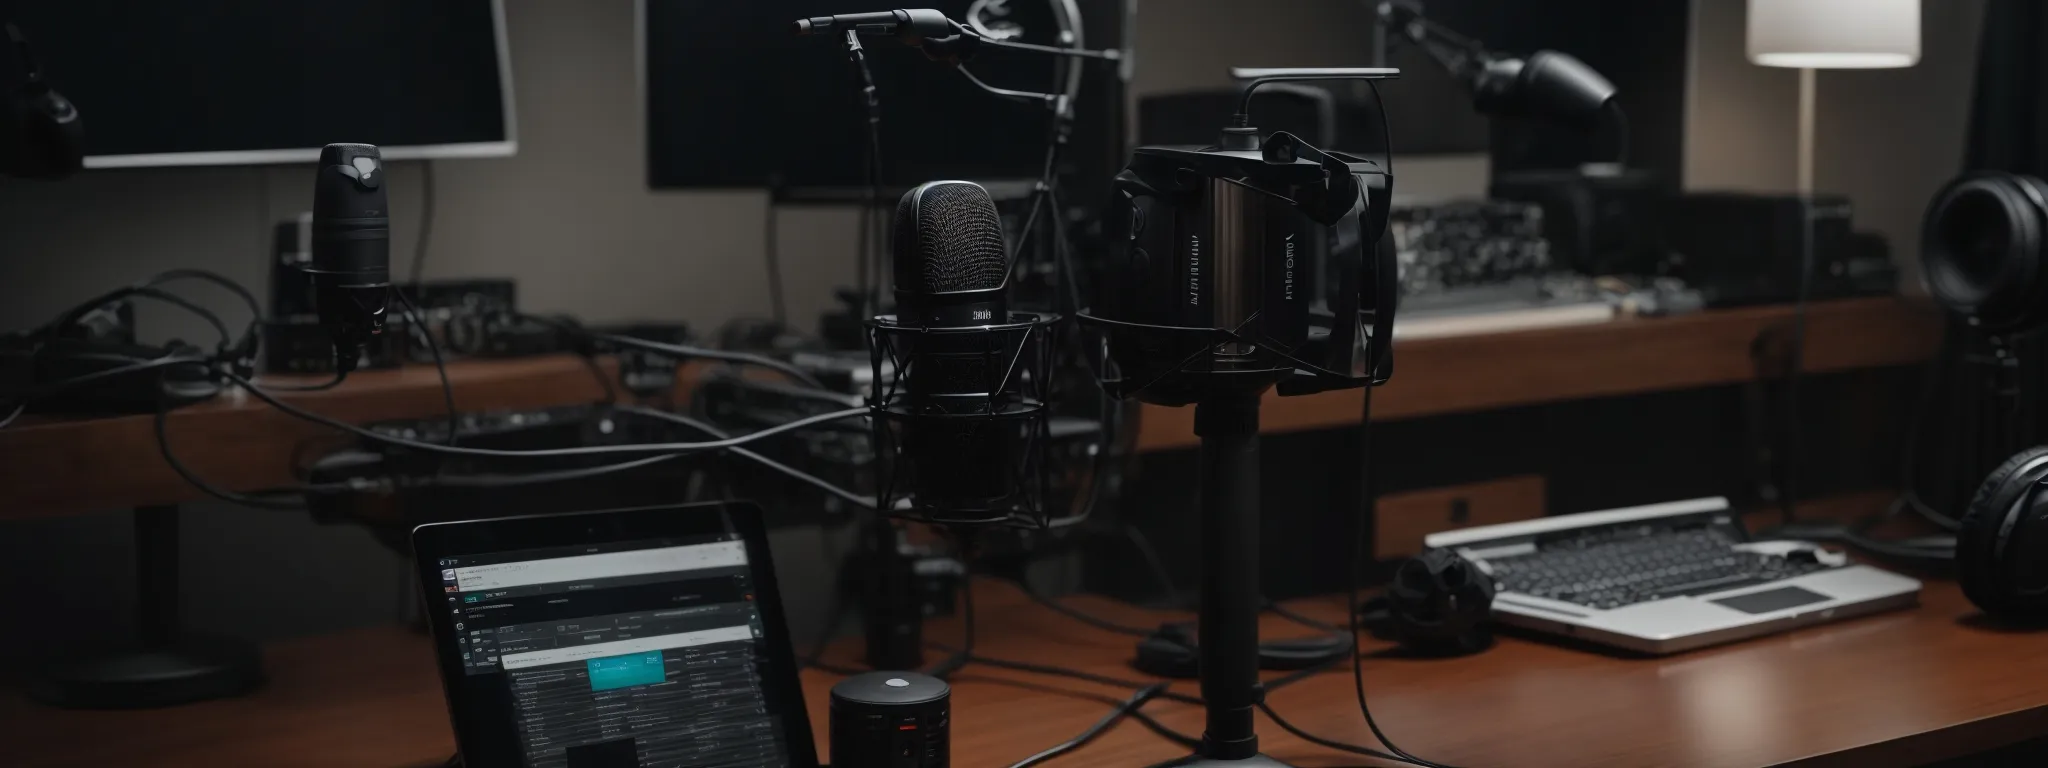 a podcast studio setup with microphones and headphones on a table, suggesting an in-depth discussion on seo and backlink strategies.